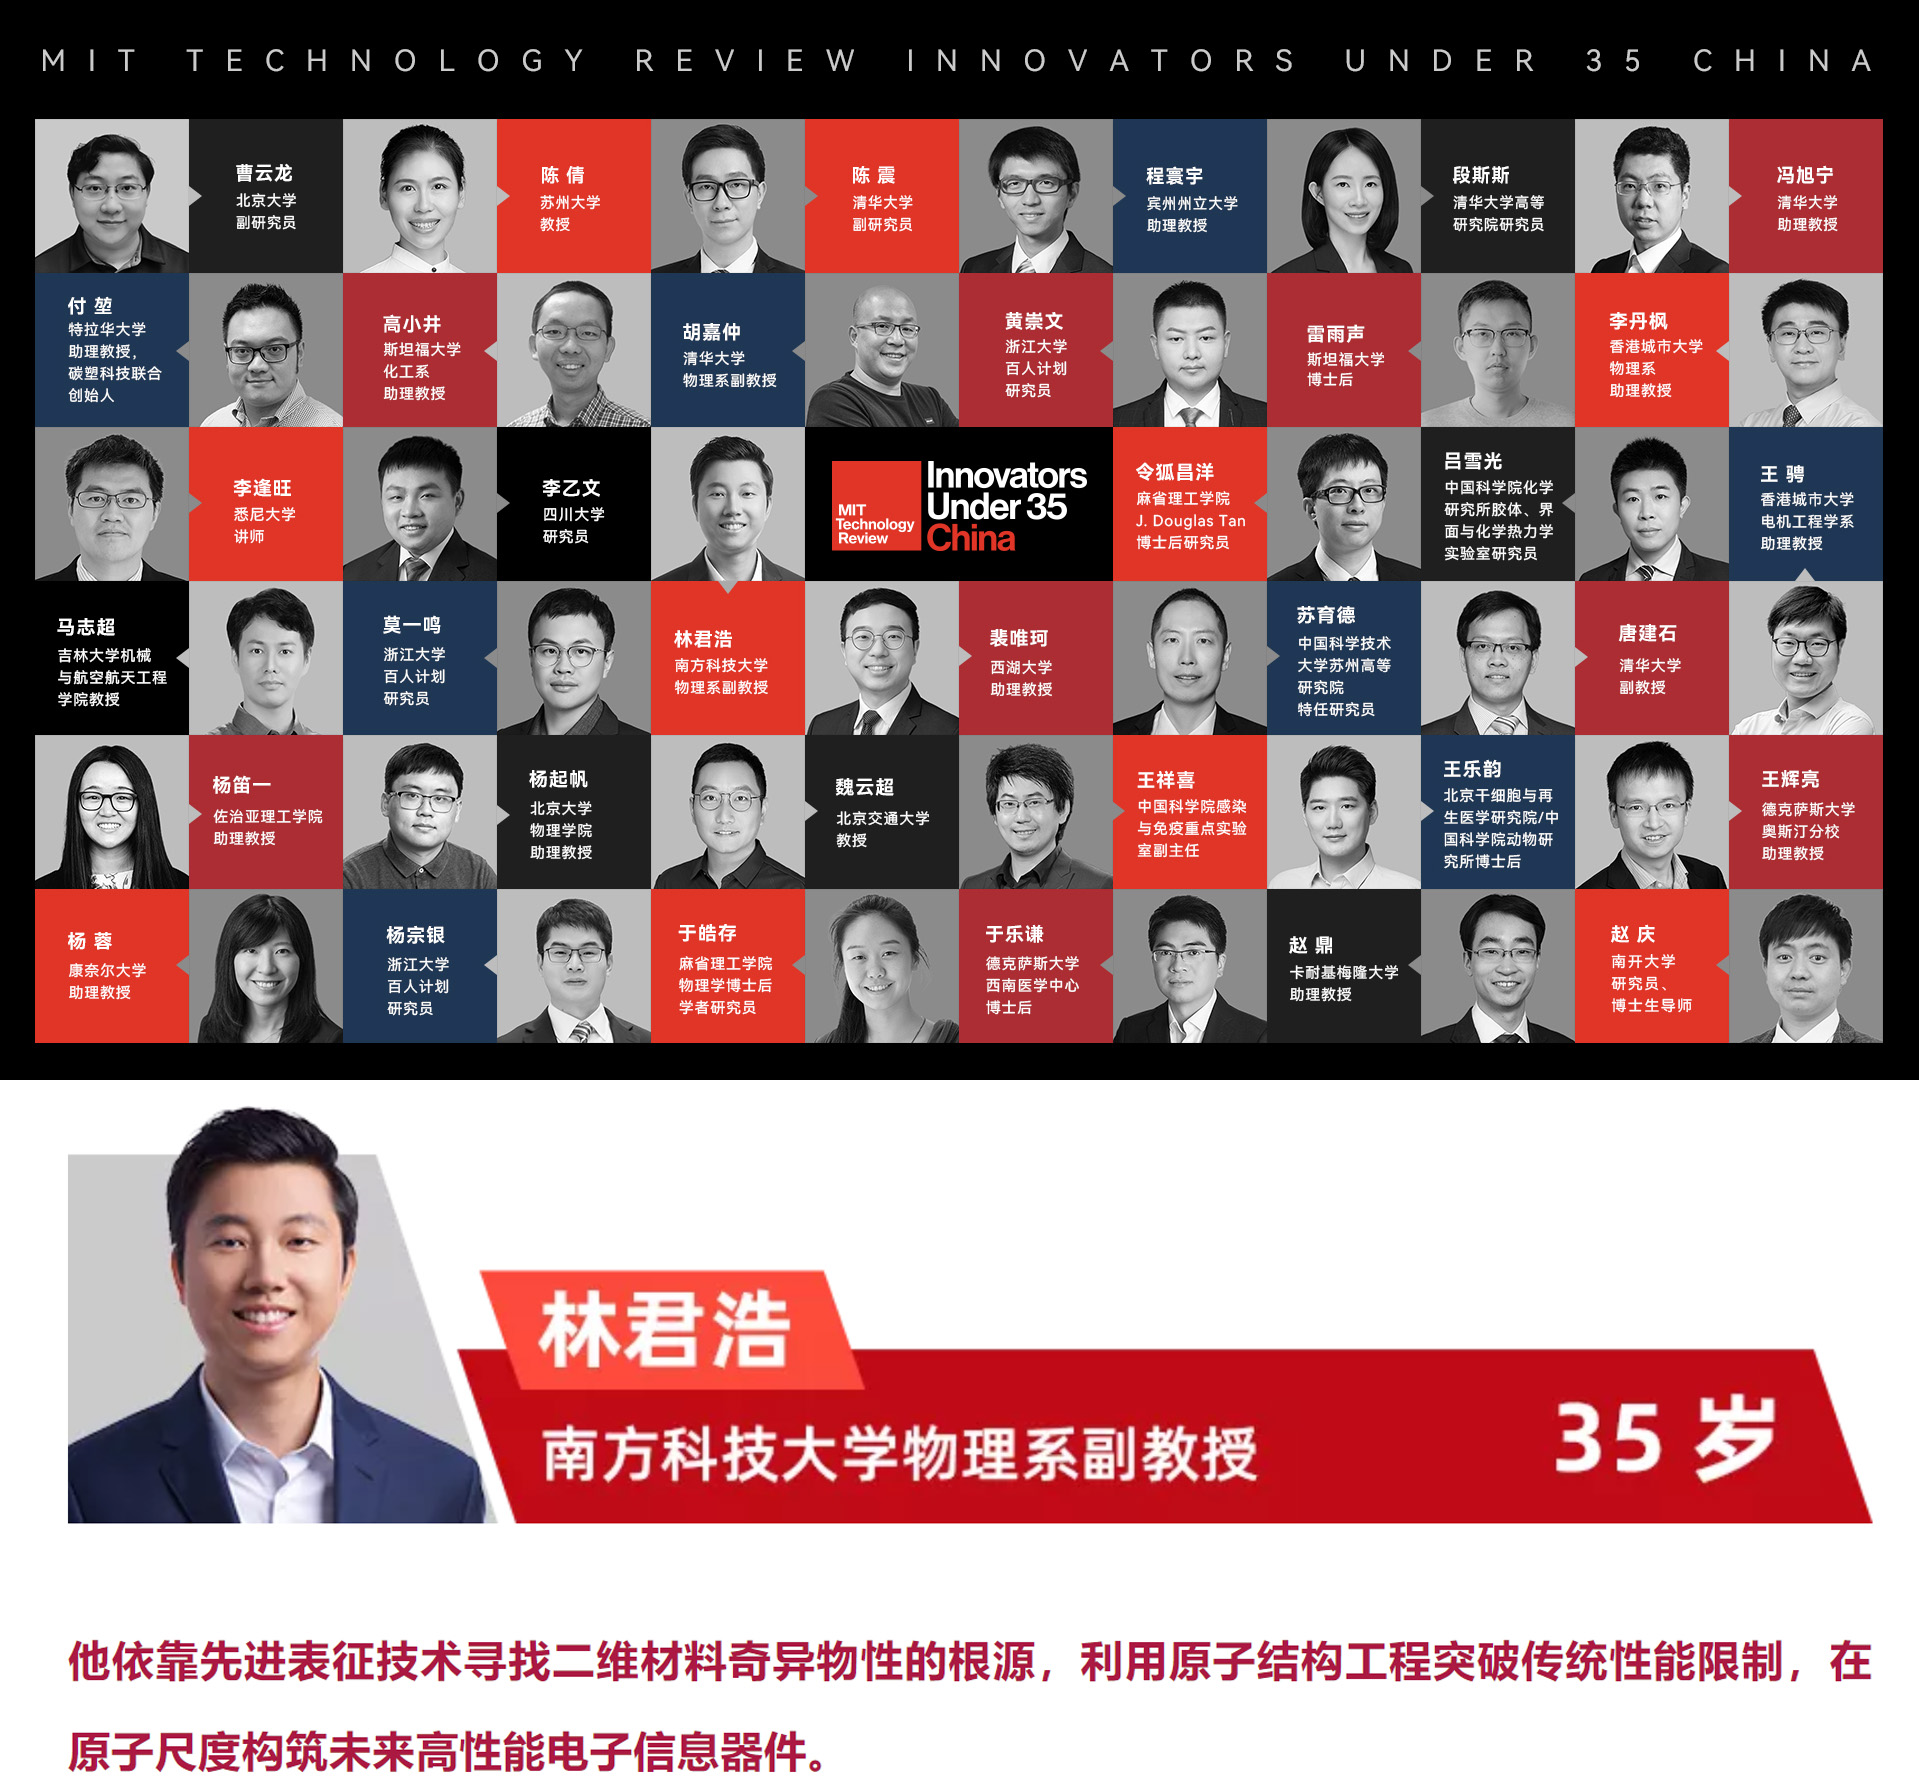 Prof. Junhao Lin was elected as one of the most impacting young scientists in the MIT technology review for TR35 China 2021!